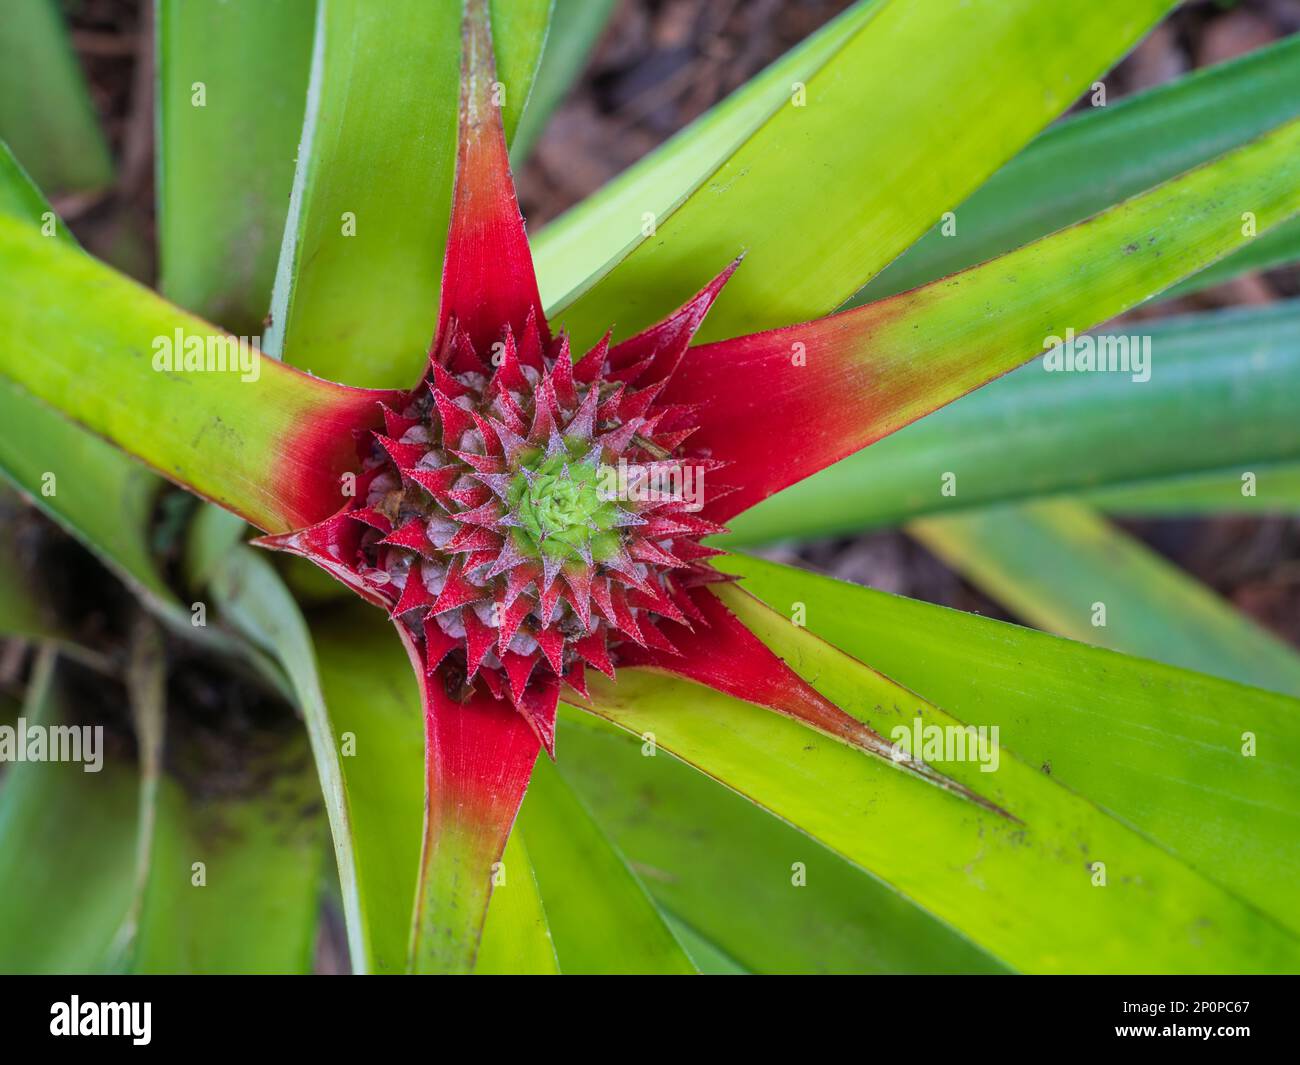 Closeup top view of bright red and green pineapple aka ananas comosus inflorescence and starting young fruit growing outdoors Stock Photo